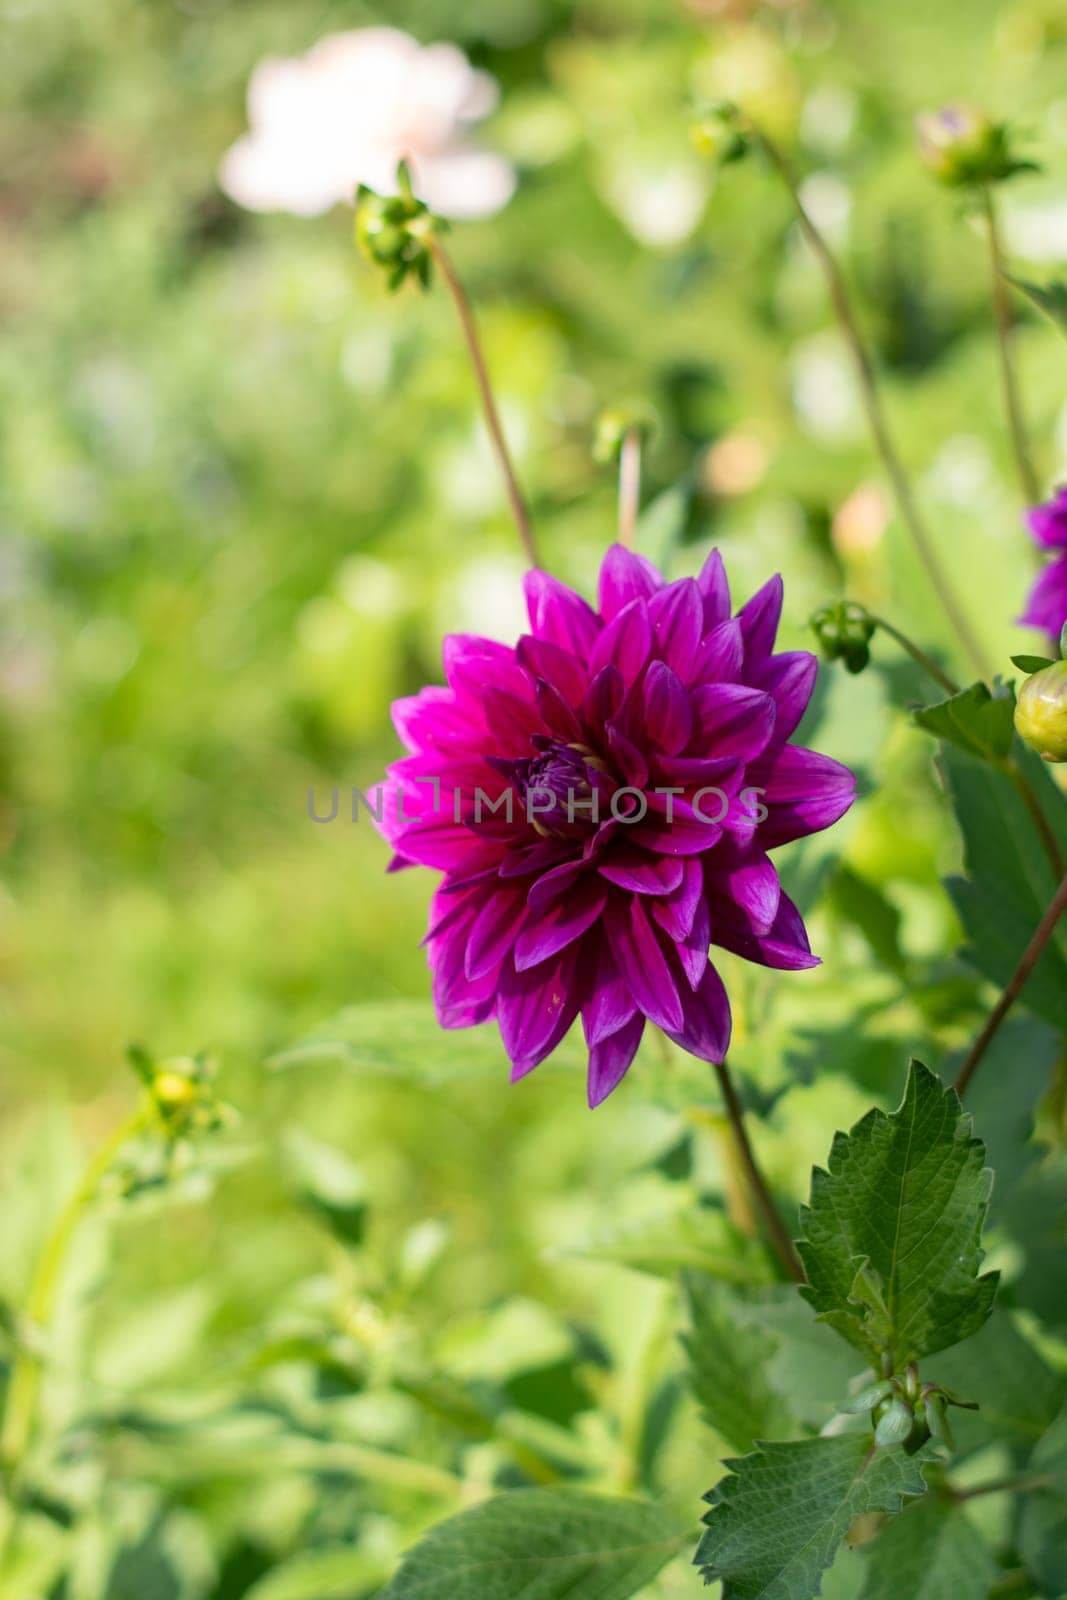 Purple decorative luxury, Thomas Edison dahlia in bloom in the summer garden, natural floral background by KaterinaDalemans